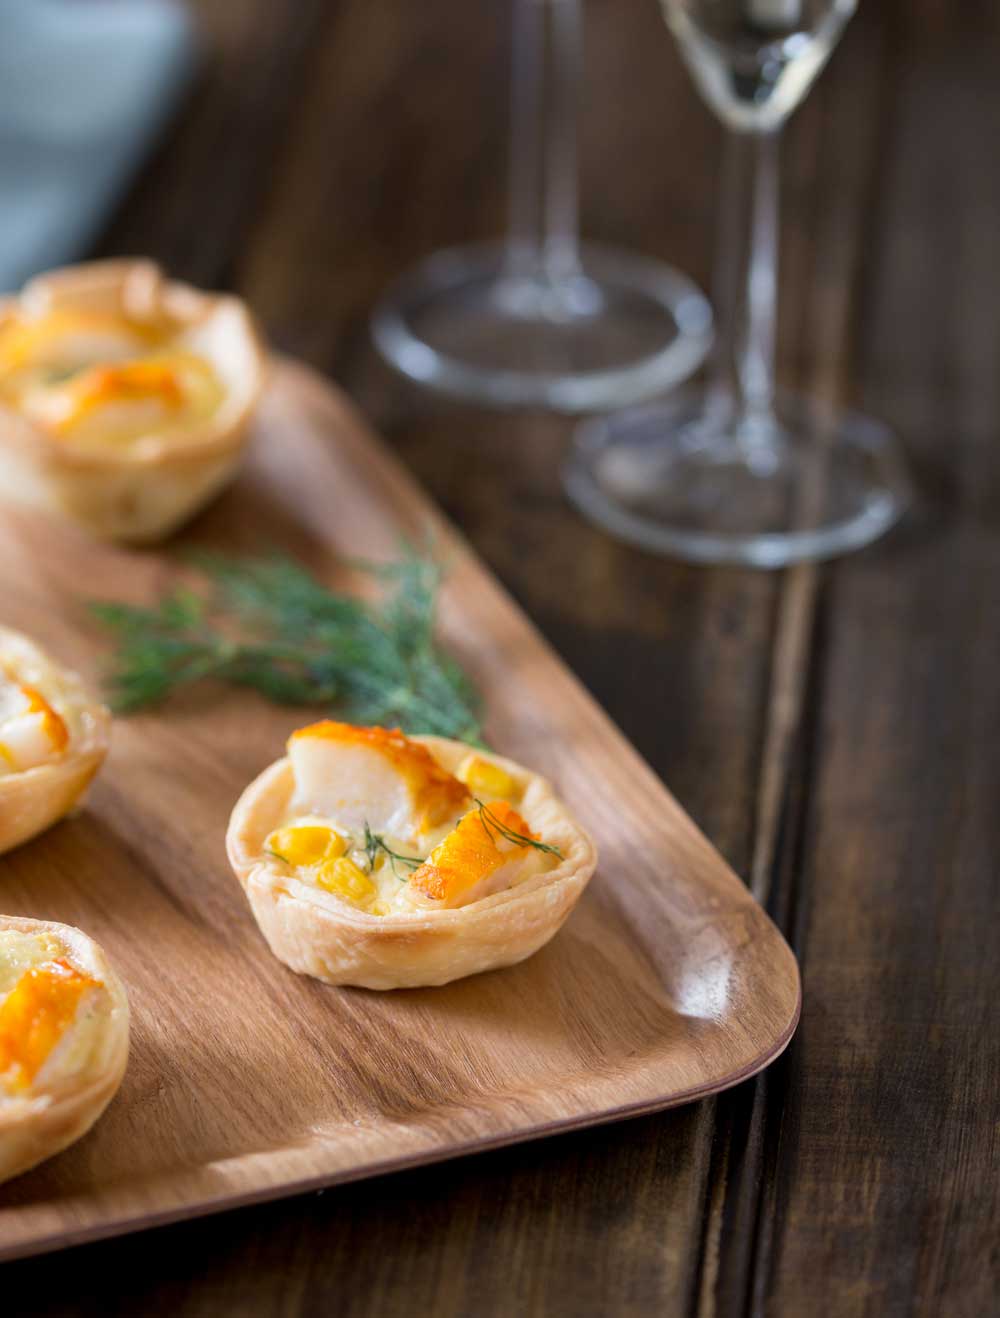 Smoked fish and sweetcorn combined with a a rich egg mixture and incased in a perfectly crisp tartlet case. These Smoked Fish and Sweetcorn Tartlets are so good, I bet you can't stop at one!